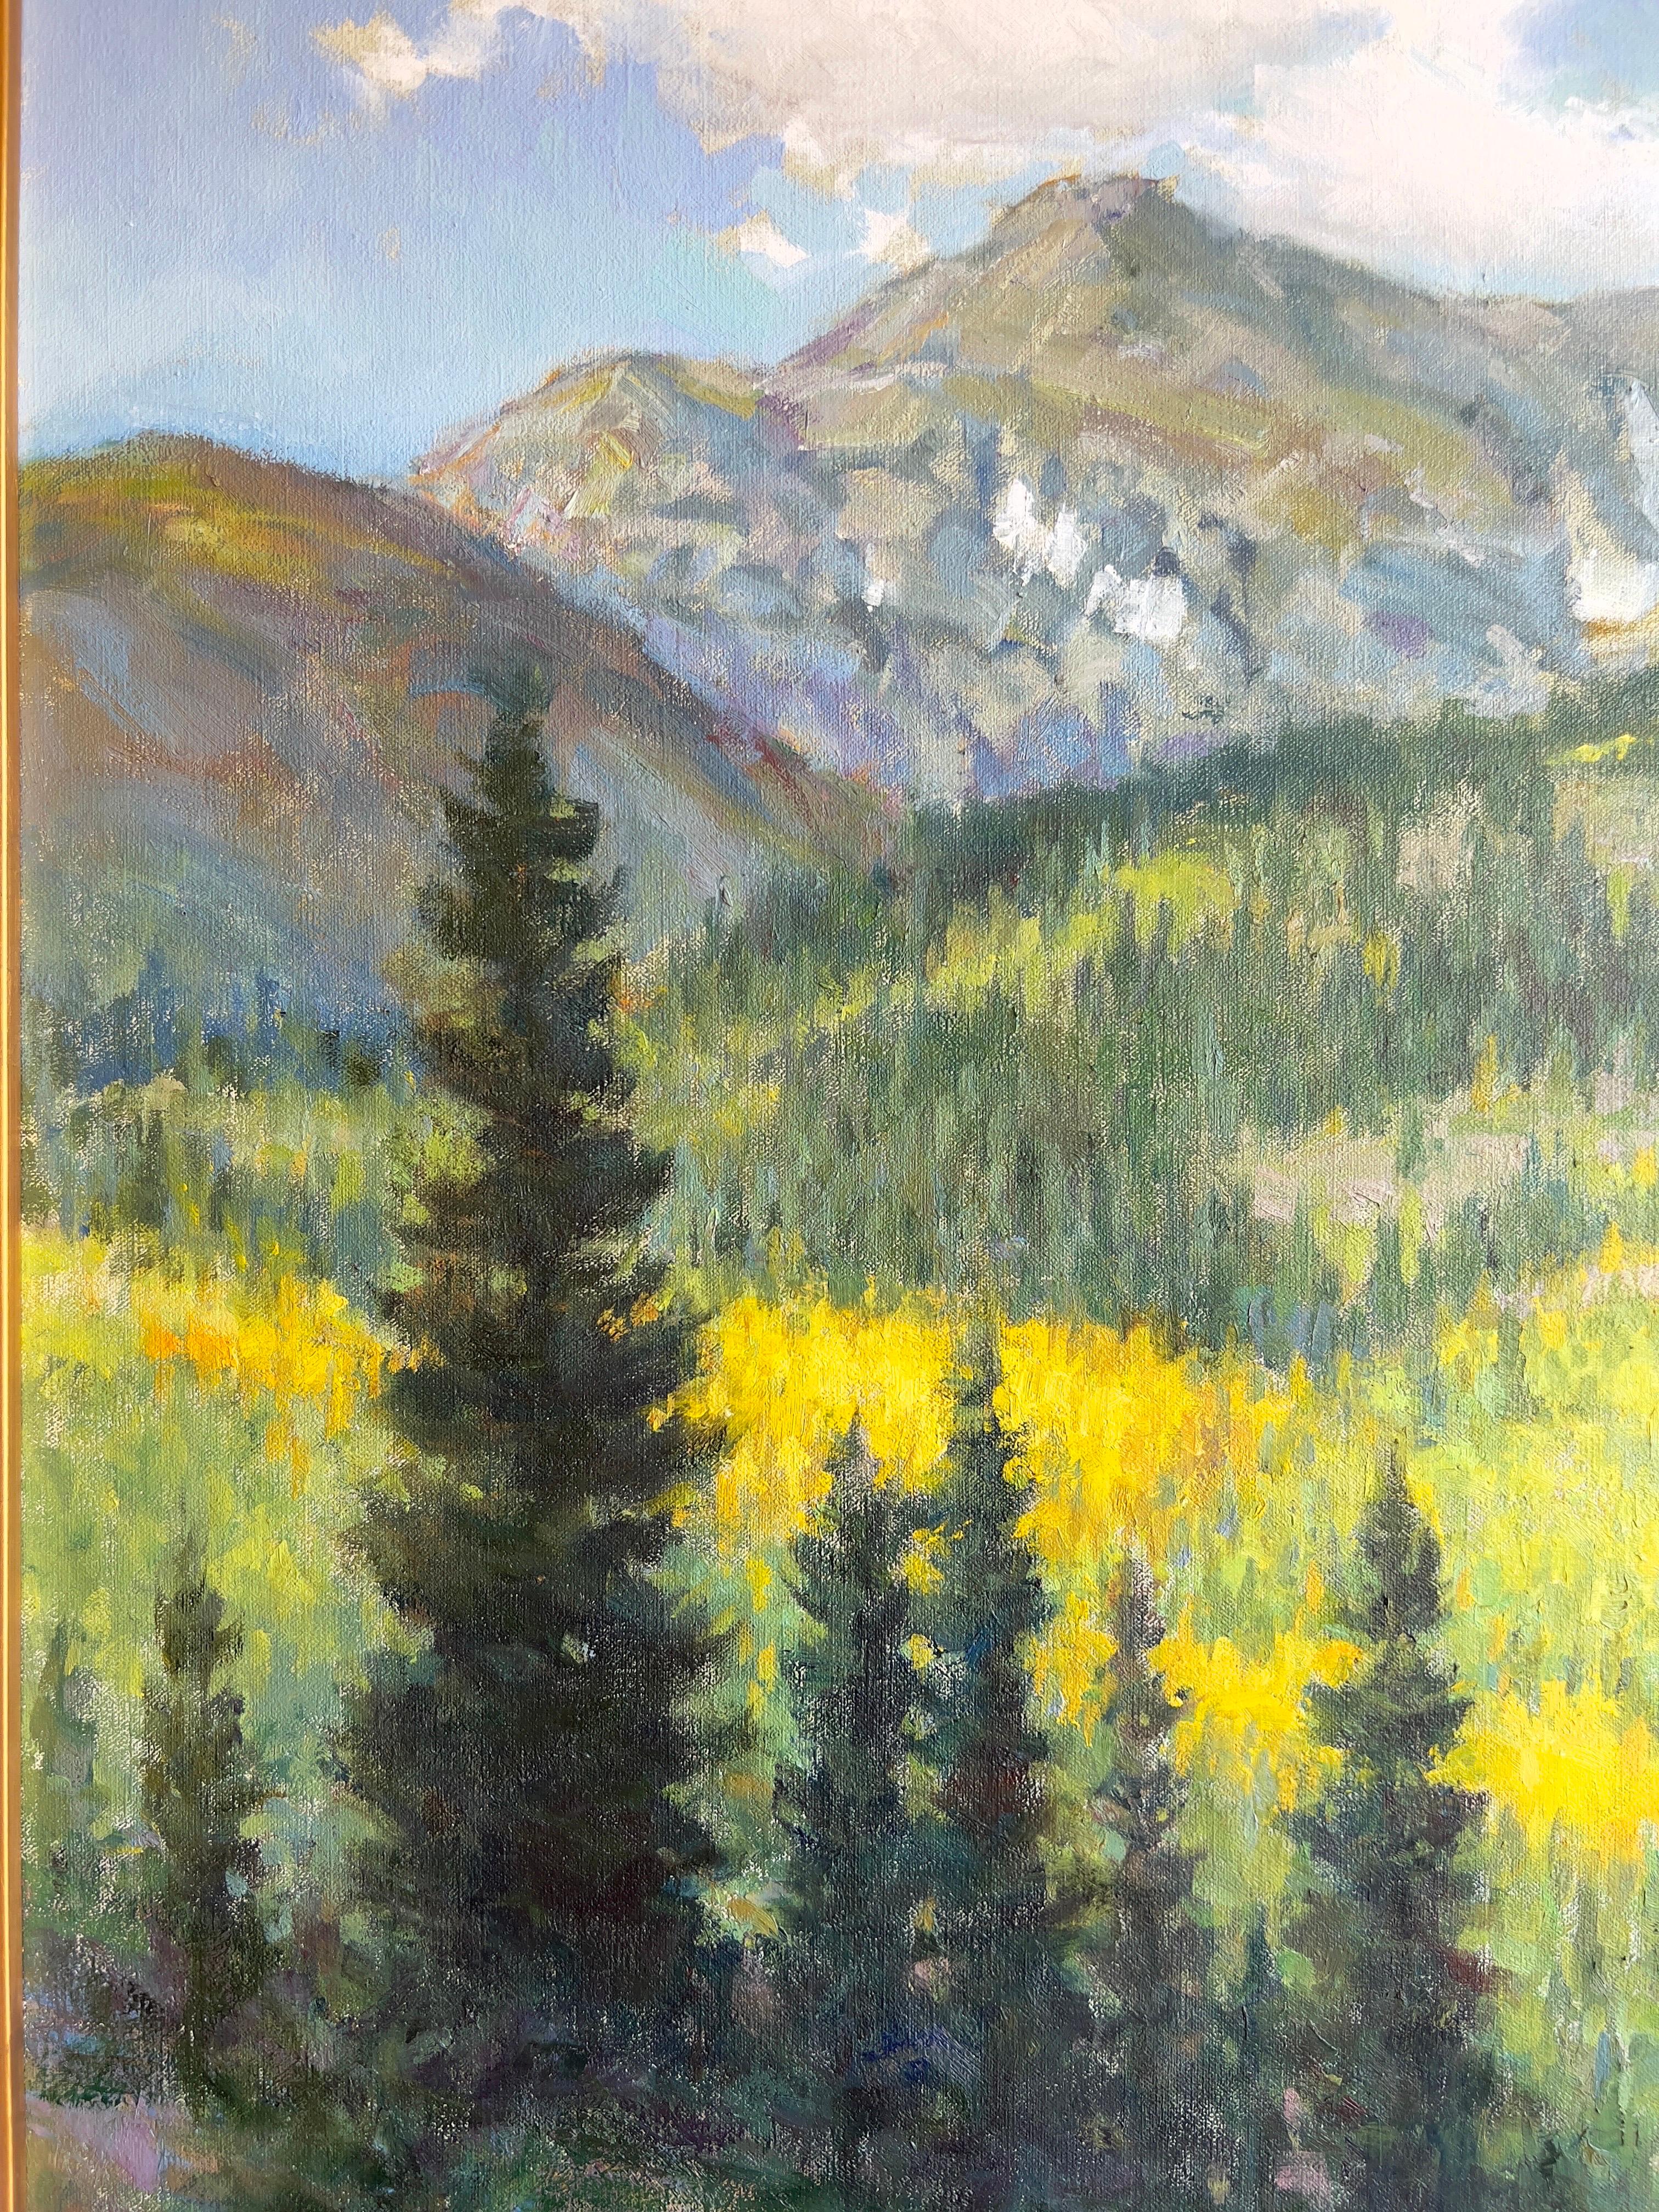 This stunning artwork was painted by artist Lynn Gertenbach at Silverton Canyon, California. Using a palette of primarily neutral colors, Gertenbach masterfully applied oil on canvas to create a truly captivating piece. The painting is in excellent